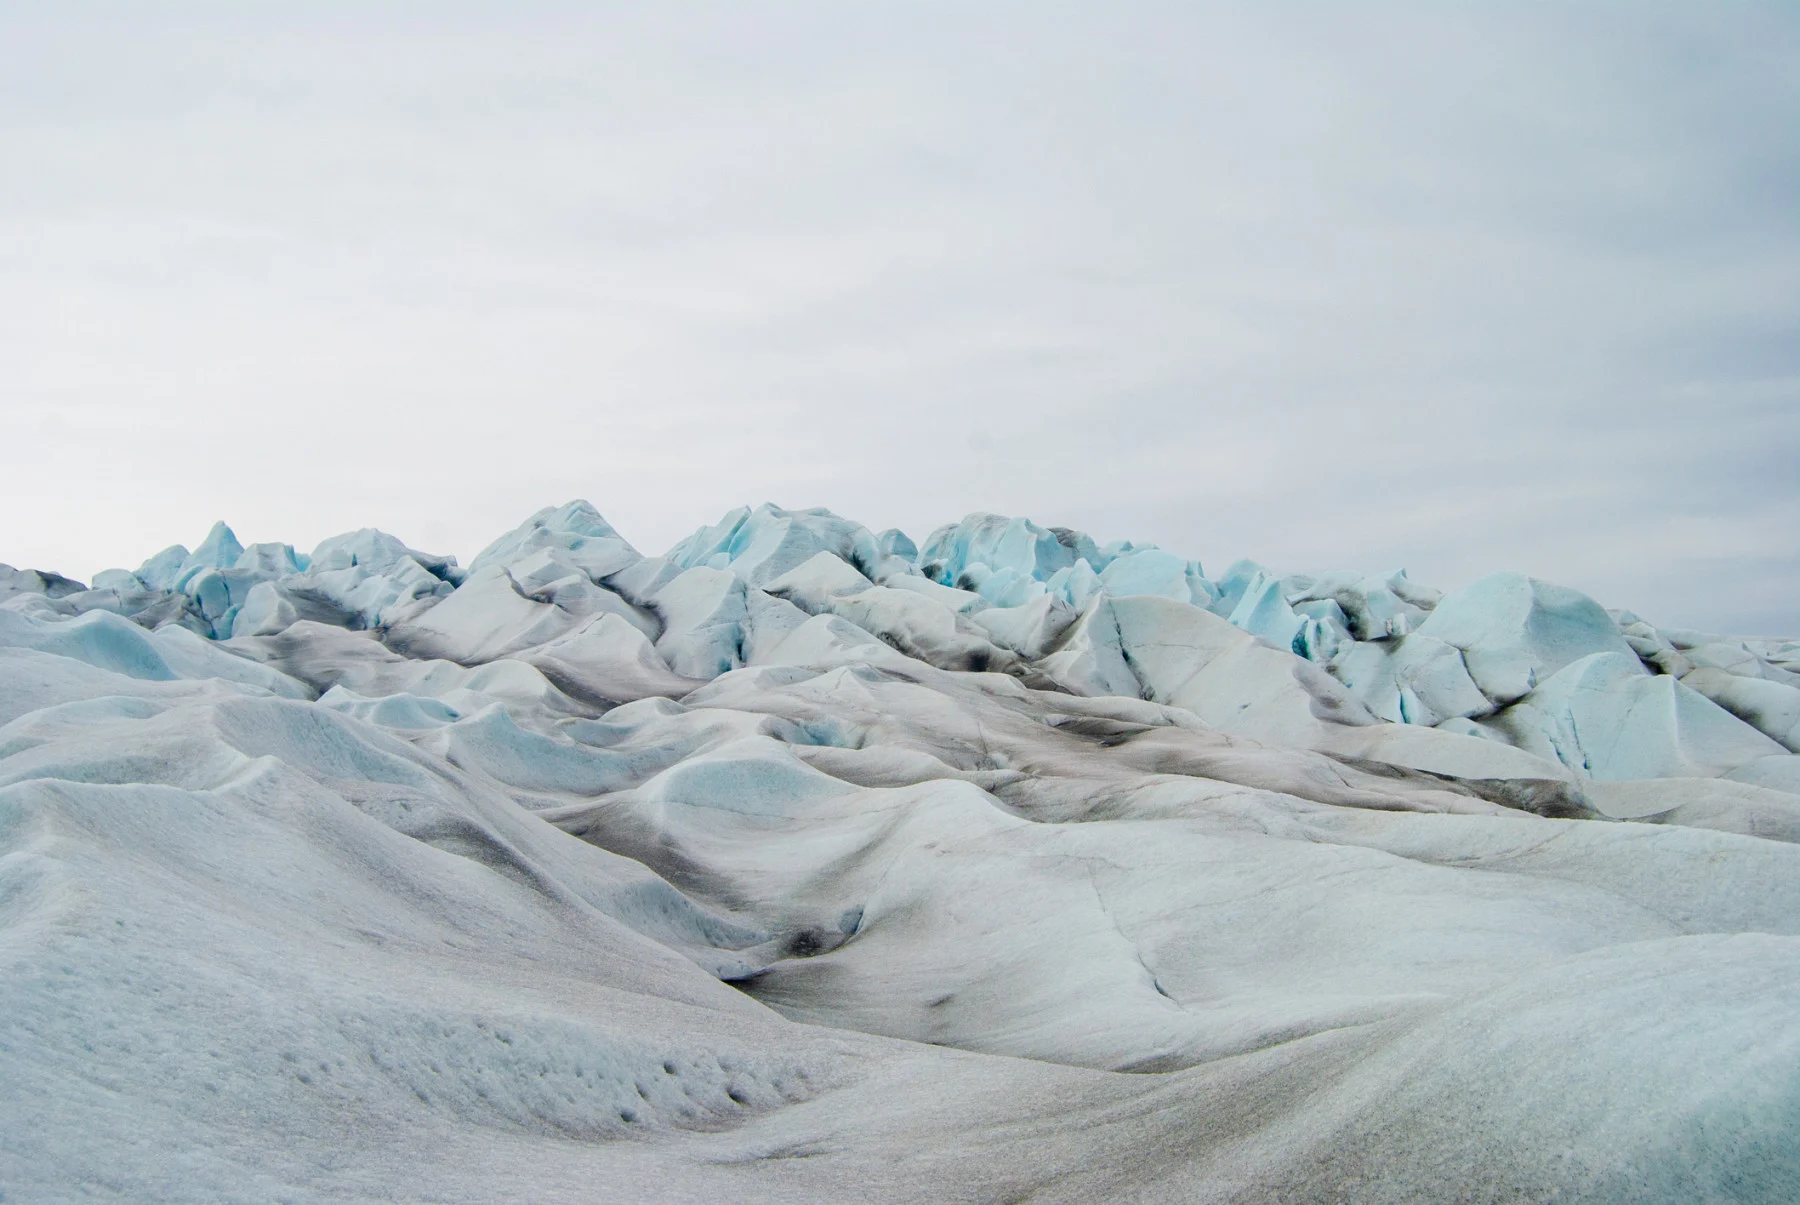 greenland glacier (Jhony. iStock / Getty Images Plus)